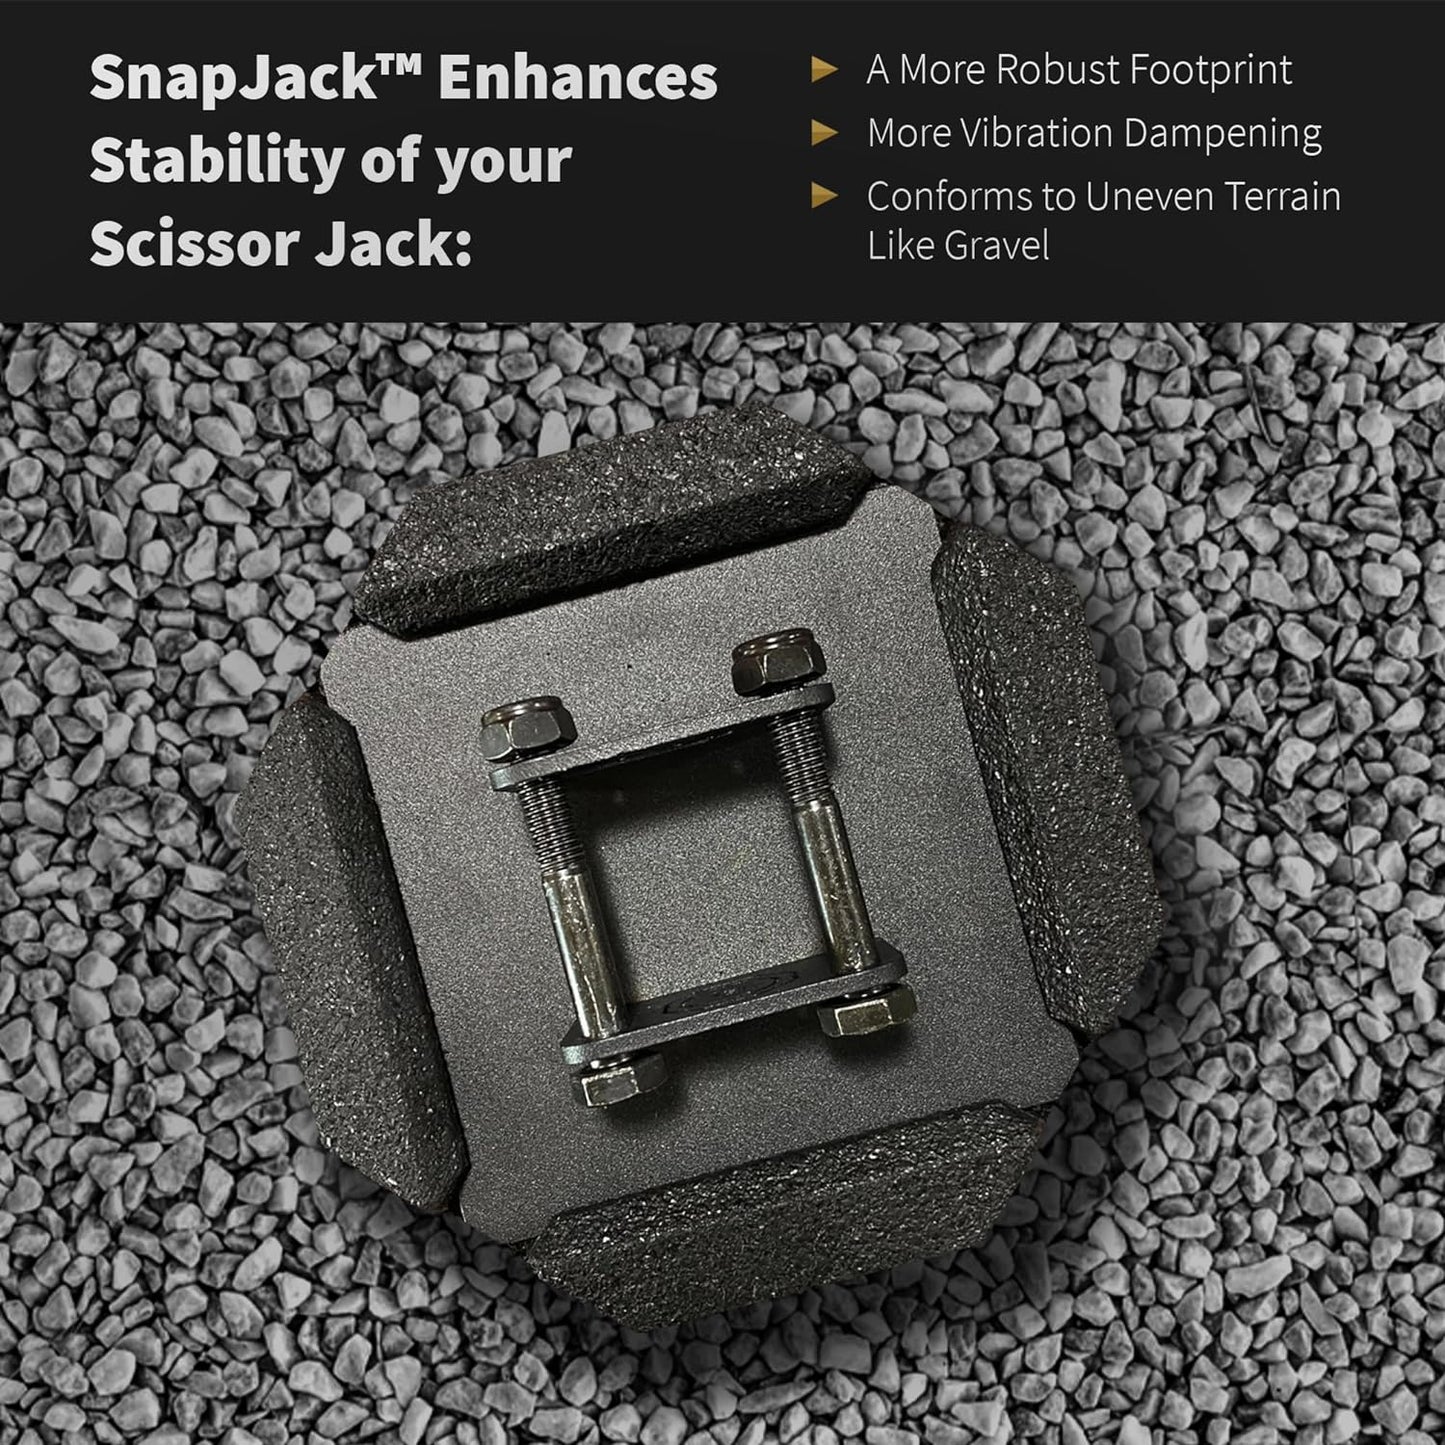 SnapPad SnapJack SJ (Pack of 4) | Two-Point Trailer Jack Stands Featuring 5.5" Metal Foot | Adds 61% Additional Surface Area, 3.79 lbs. Per Pad & 7.25" Total Wi